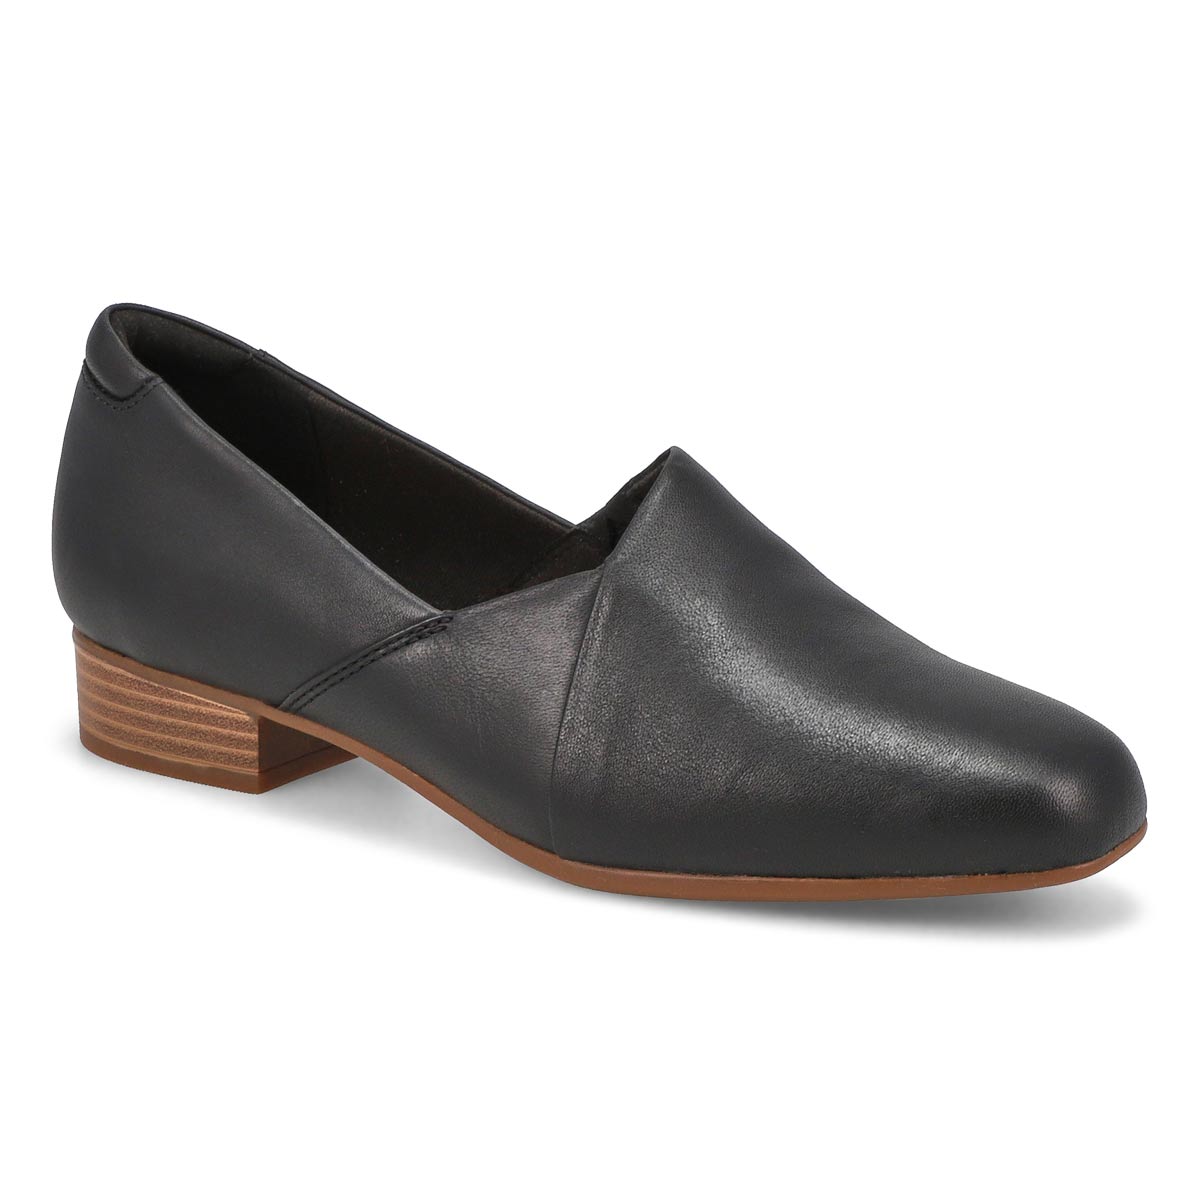 clarks shoes buy online canada